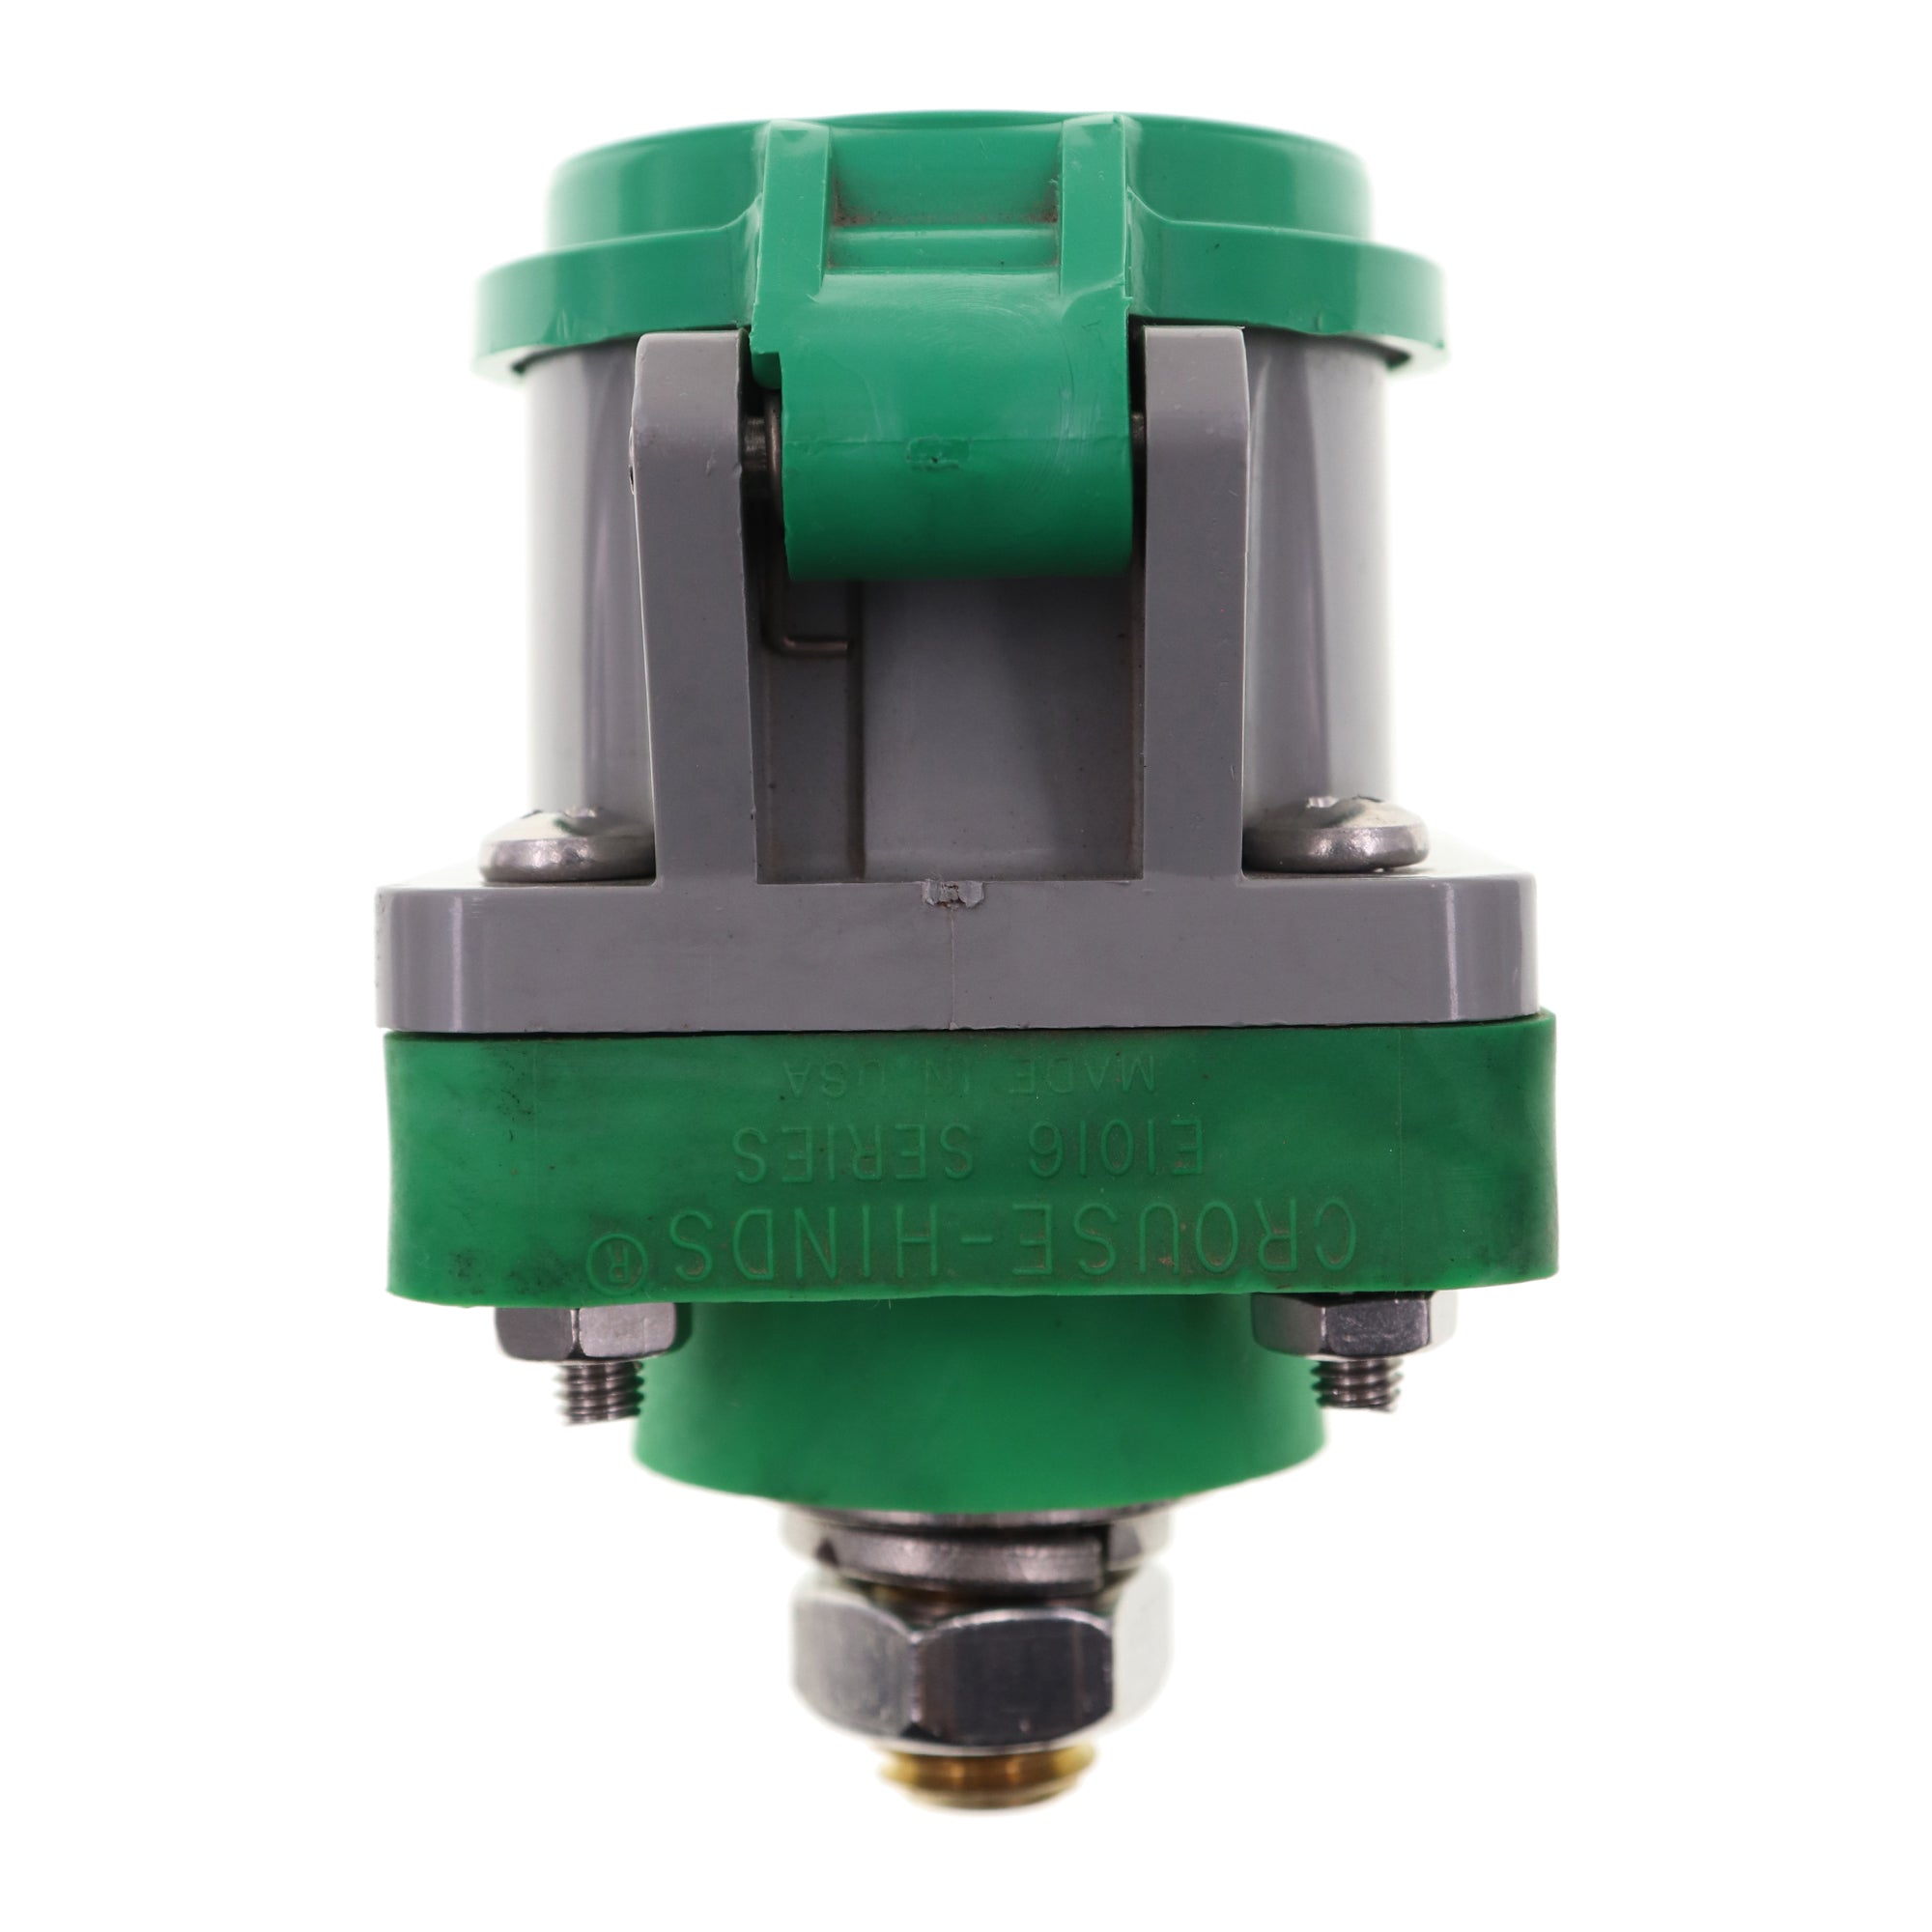 Crouse Hinds, CROUSE-HINDS E1016-1604 + E1016SC-35 J TYPE CAMLOCK MALE RECEPTACLE, 400A, GREEN